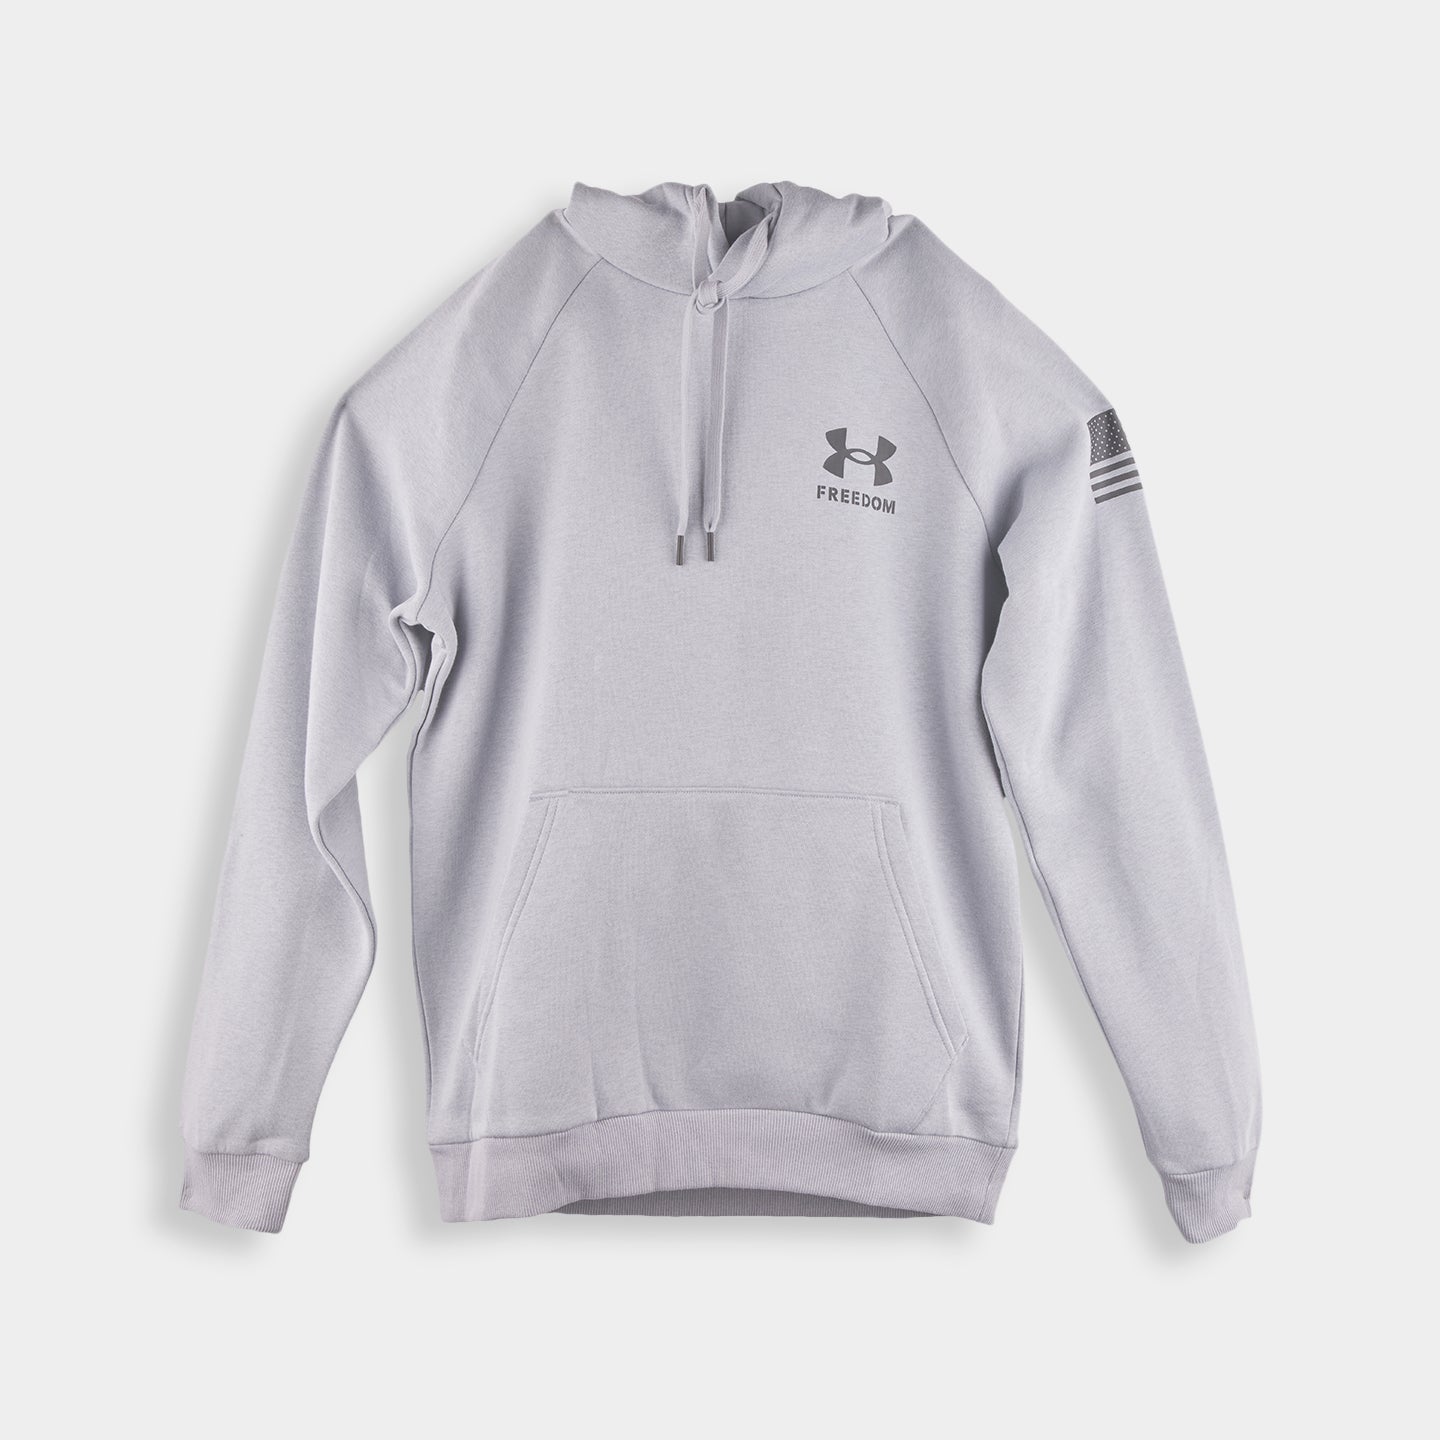 Under Armour Freedom Flag Hoodie MAIN